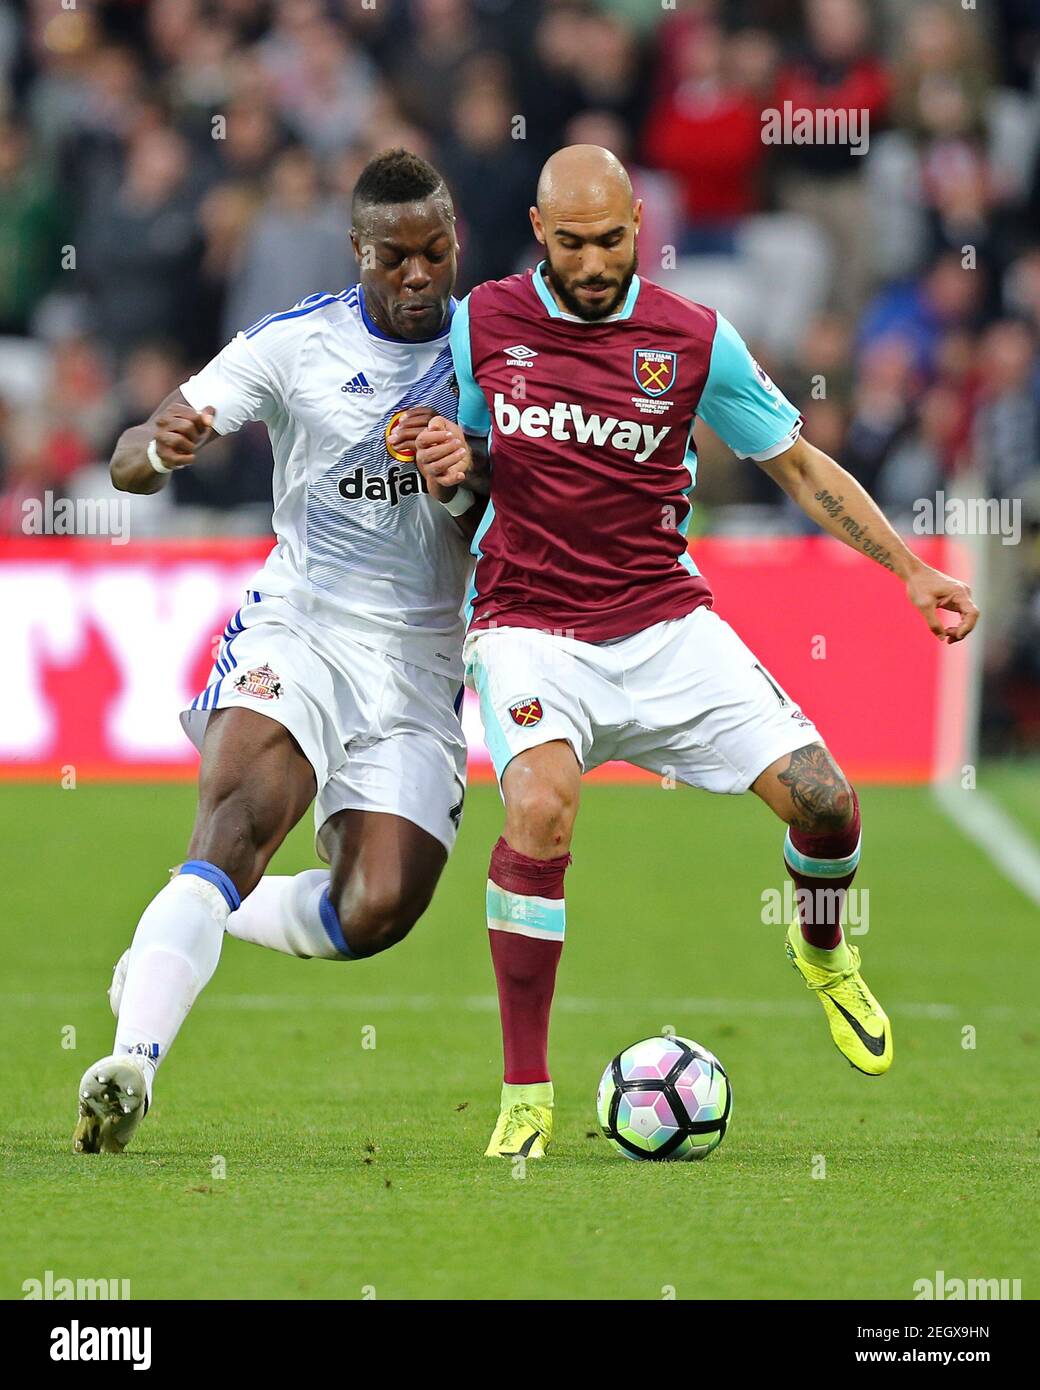 Britain Soccer Football - West Ham United v Sunderland - Premier League - London Stadium - 22/10/16 West Ham United's Simone Zaza in action with Sunderland's Lamine Kone Reuters / Paul Hackett Livepic EDITORIAL USE ONLY. No use with unauthorized audio, video, data, fixture lists, club/league logos or 'live' services. Online in-match use limited to 45 images, no video emulation. No use in betting, games or single club/league/player publications.  Please contact your account representative for further details. Stock Photo